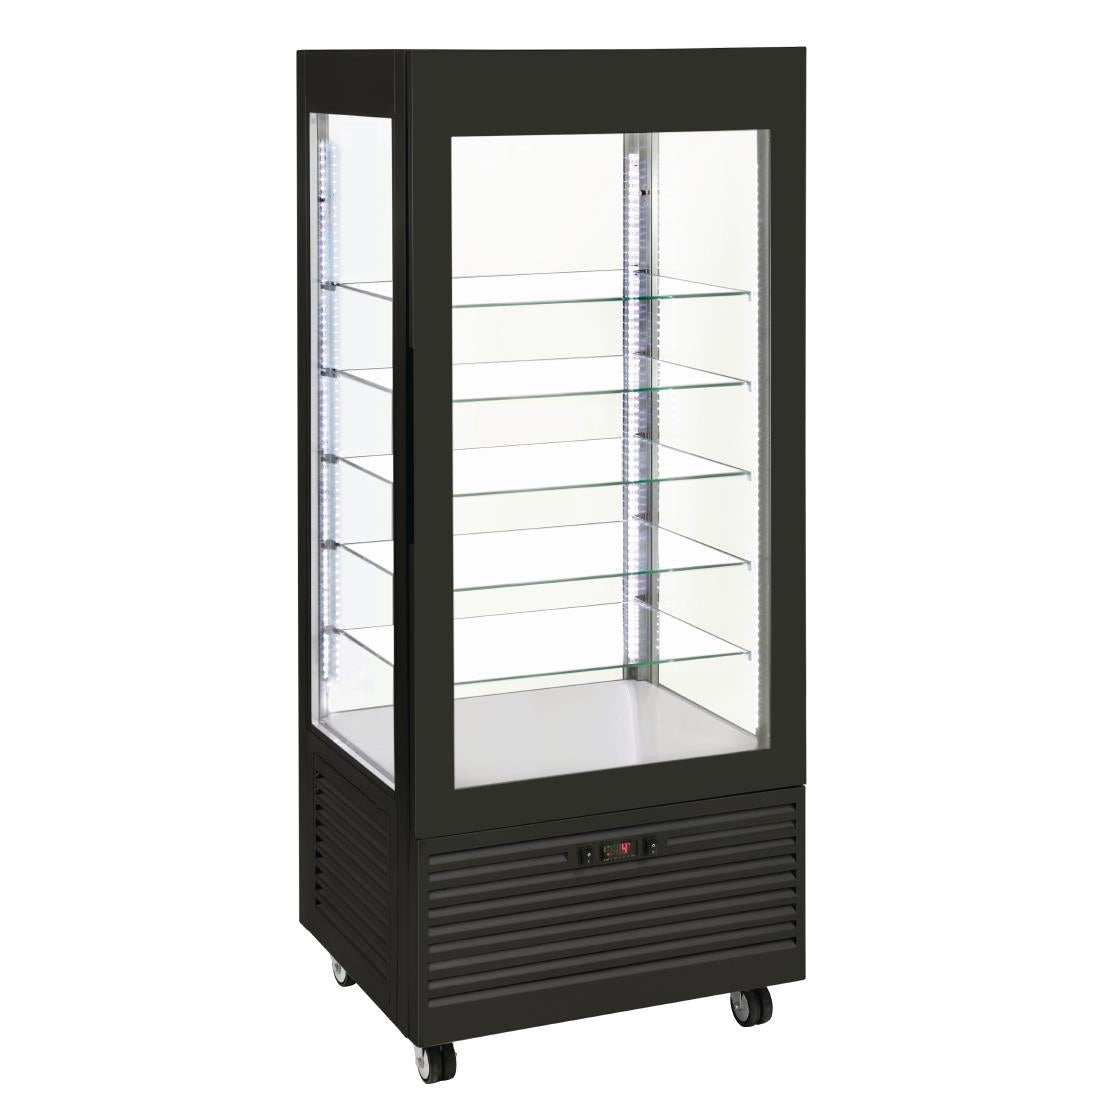 DT737 Roller Grill Display Fridge with Fixed Shelves Black JD Catering Equipment Solutions Ltd